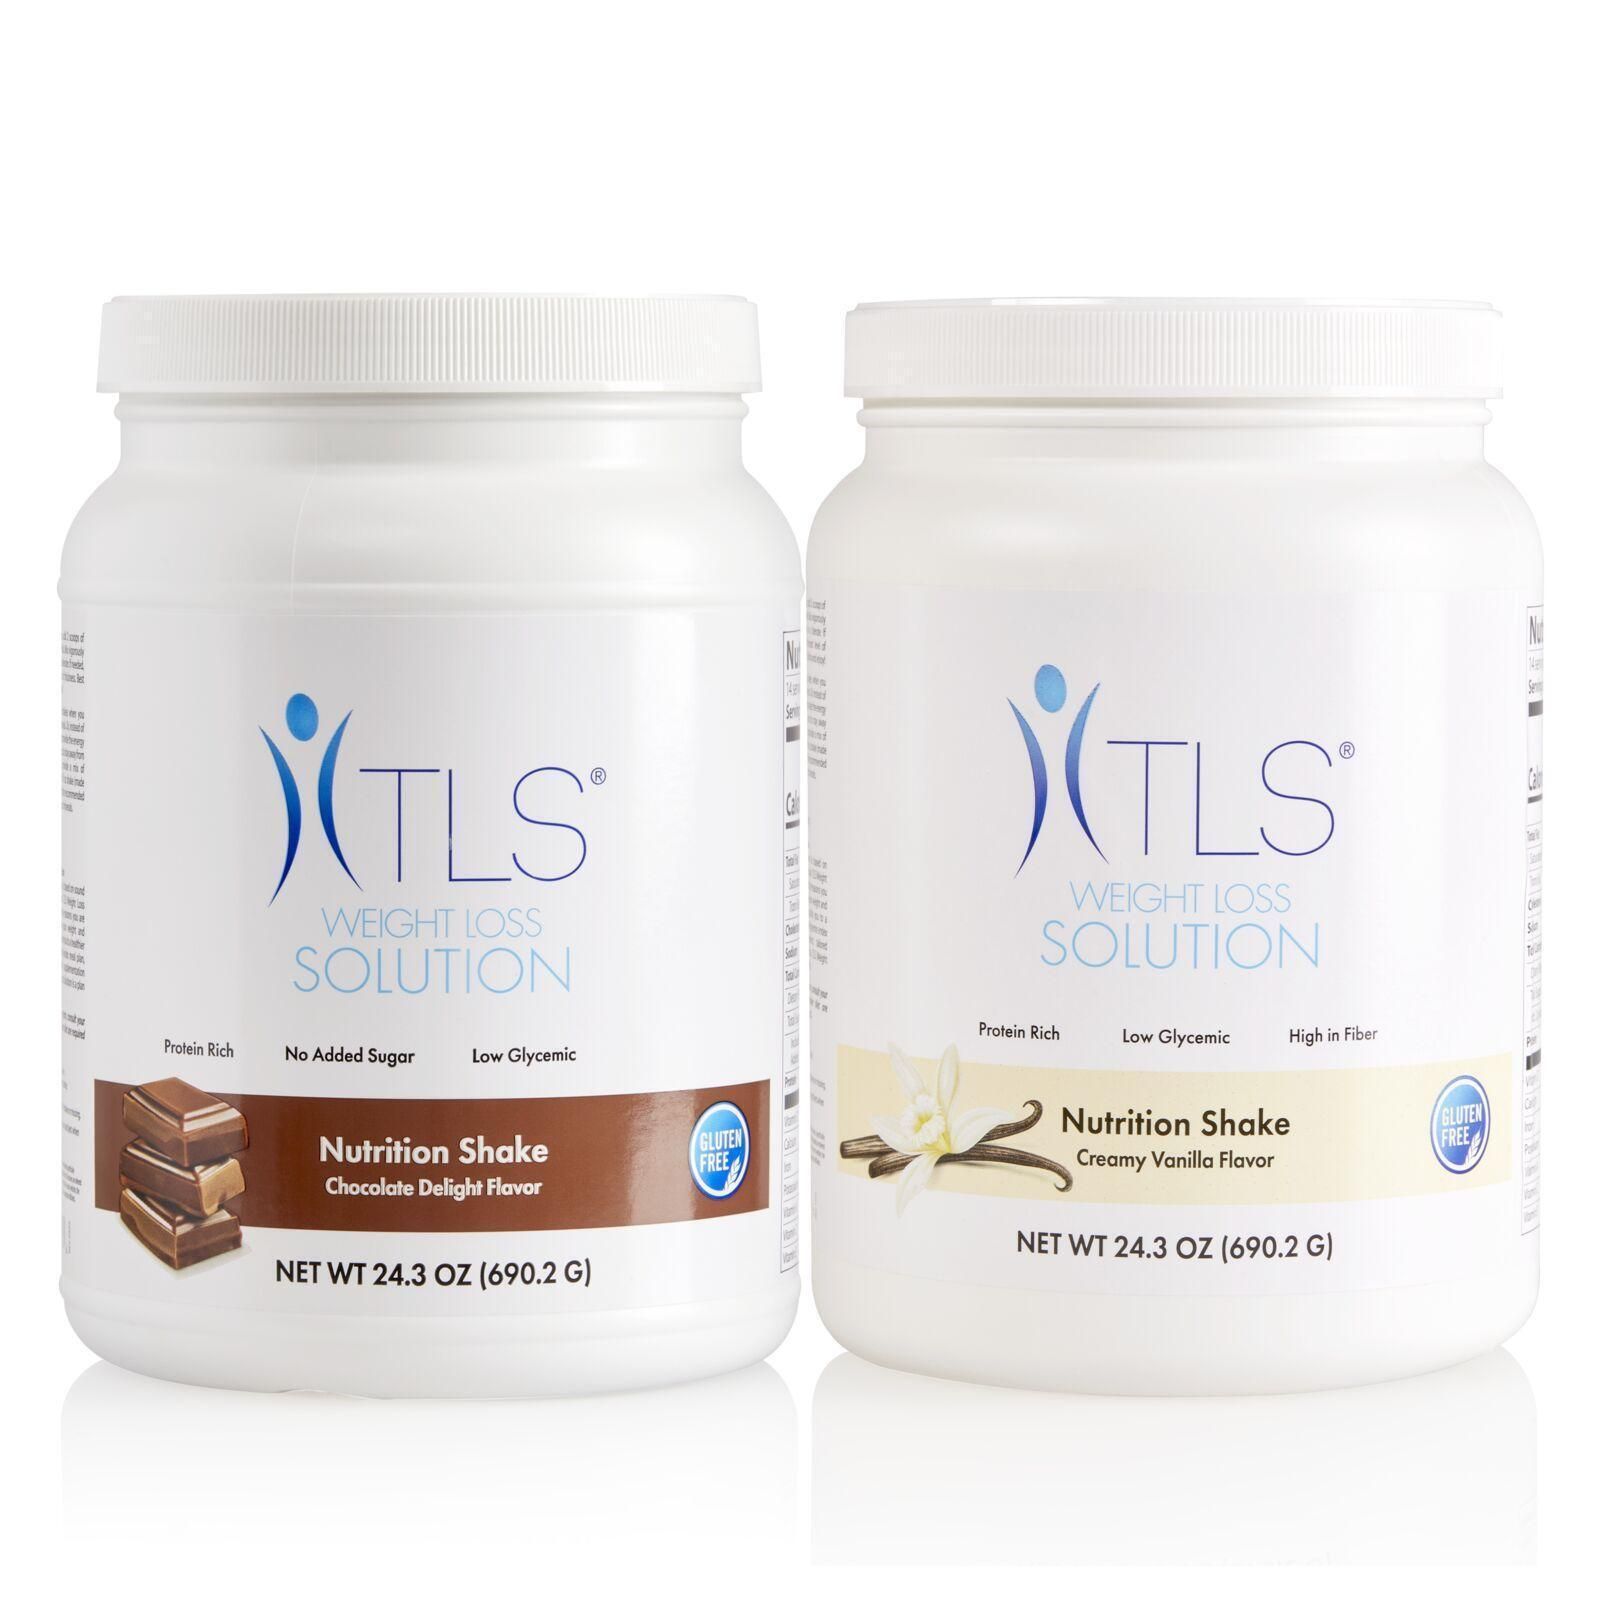 Two jars of xtls nutrition shakes are sitting next to each other on a white surface.